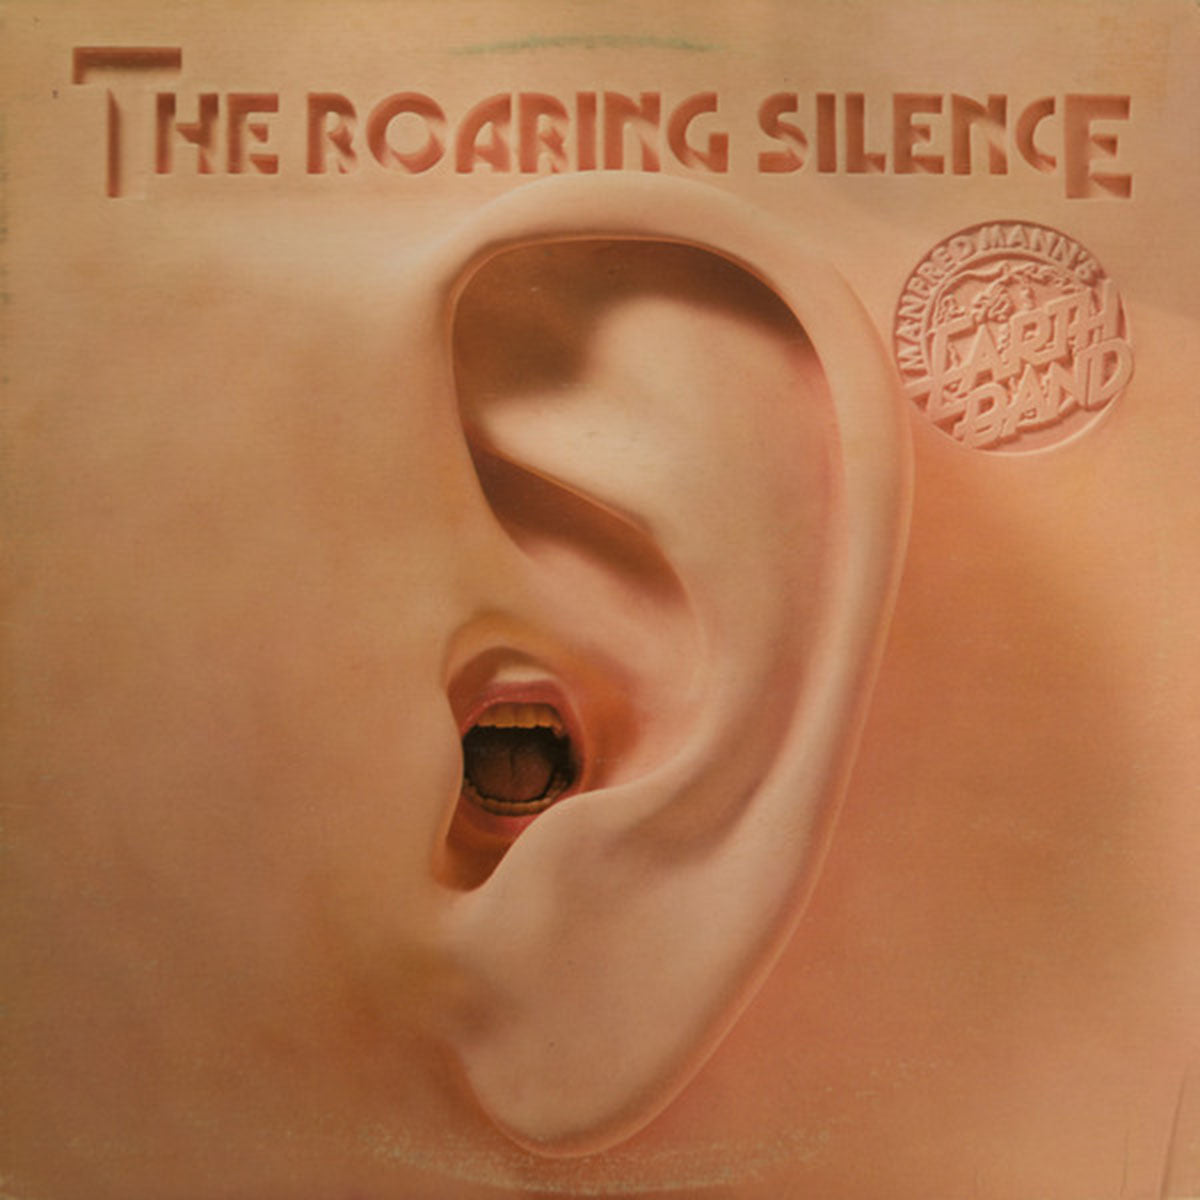 Manfred Mann's Earth Band ‎– The Roaring Silence